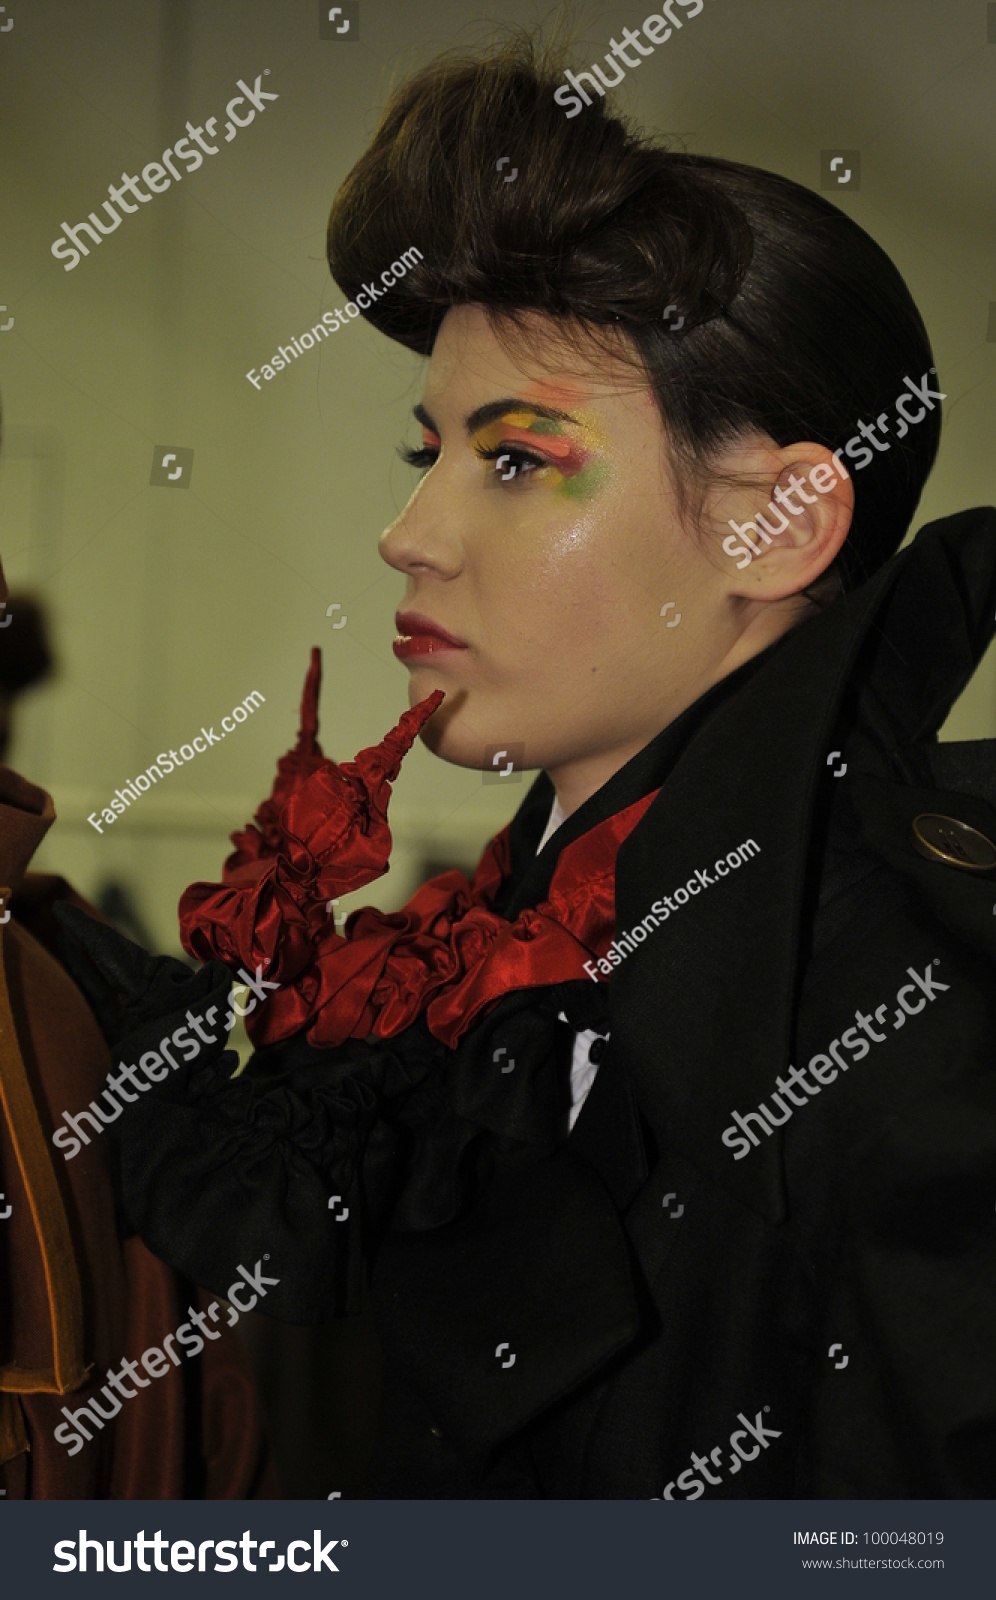 MOSCOW - MARCH 25: A model gets ready backstage at the YeZ by Yegor Zaitsev for Fall Winter 2012 presentation during MBFW on March 25, 2012 in Moscow, Russia #100048019